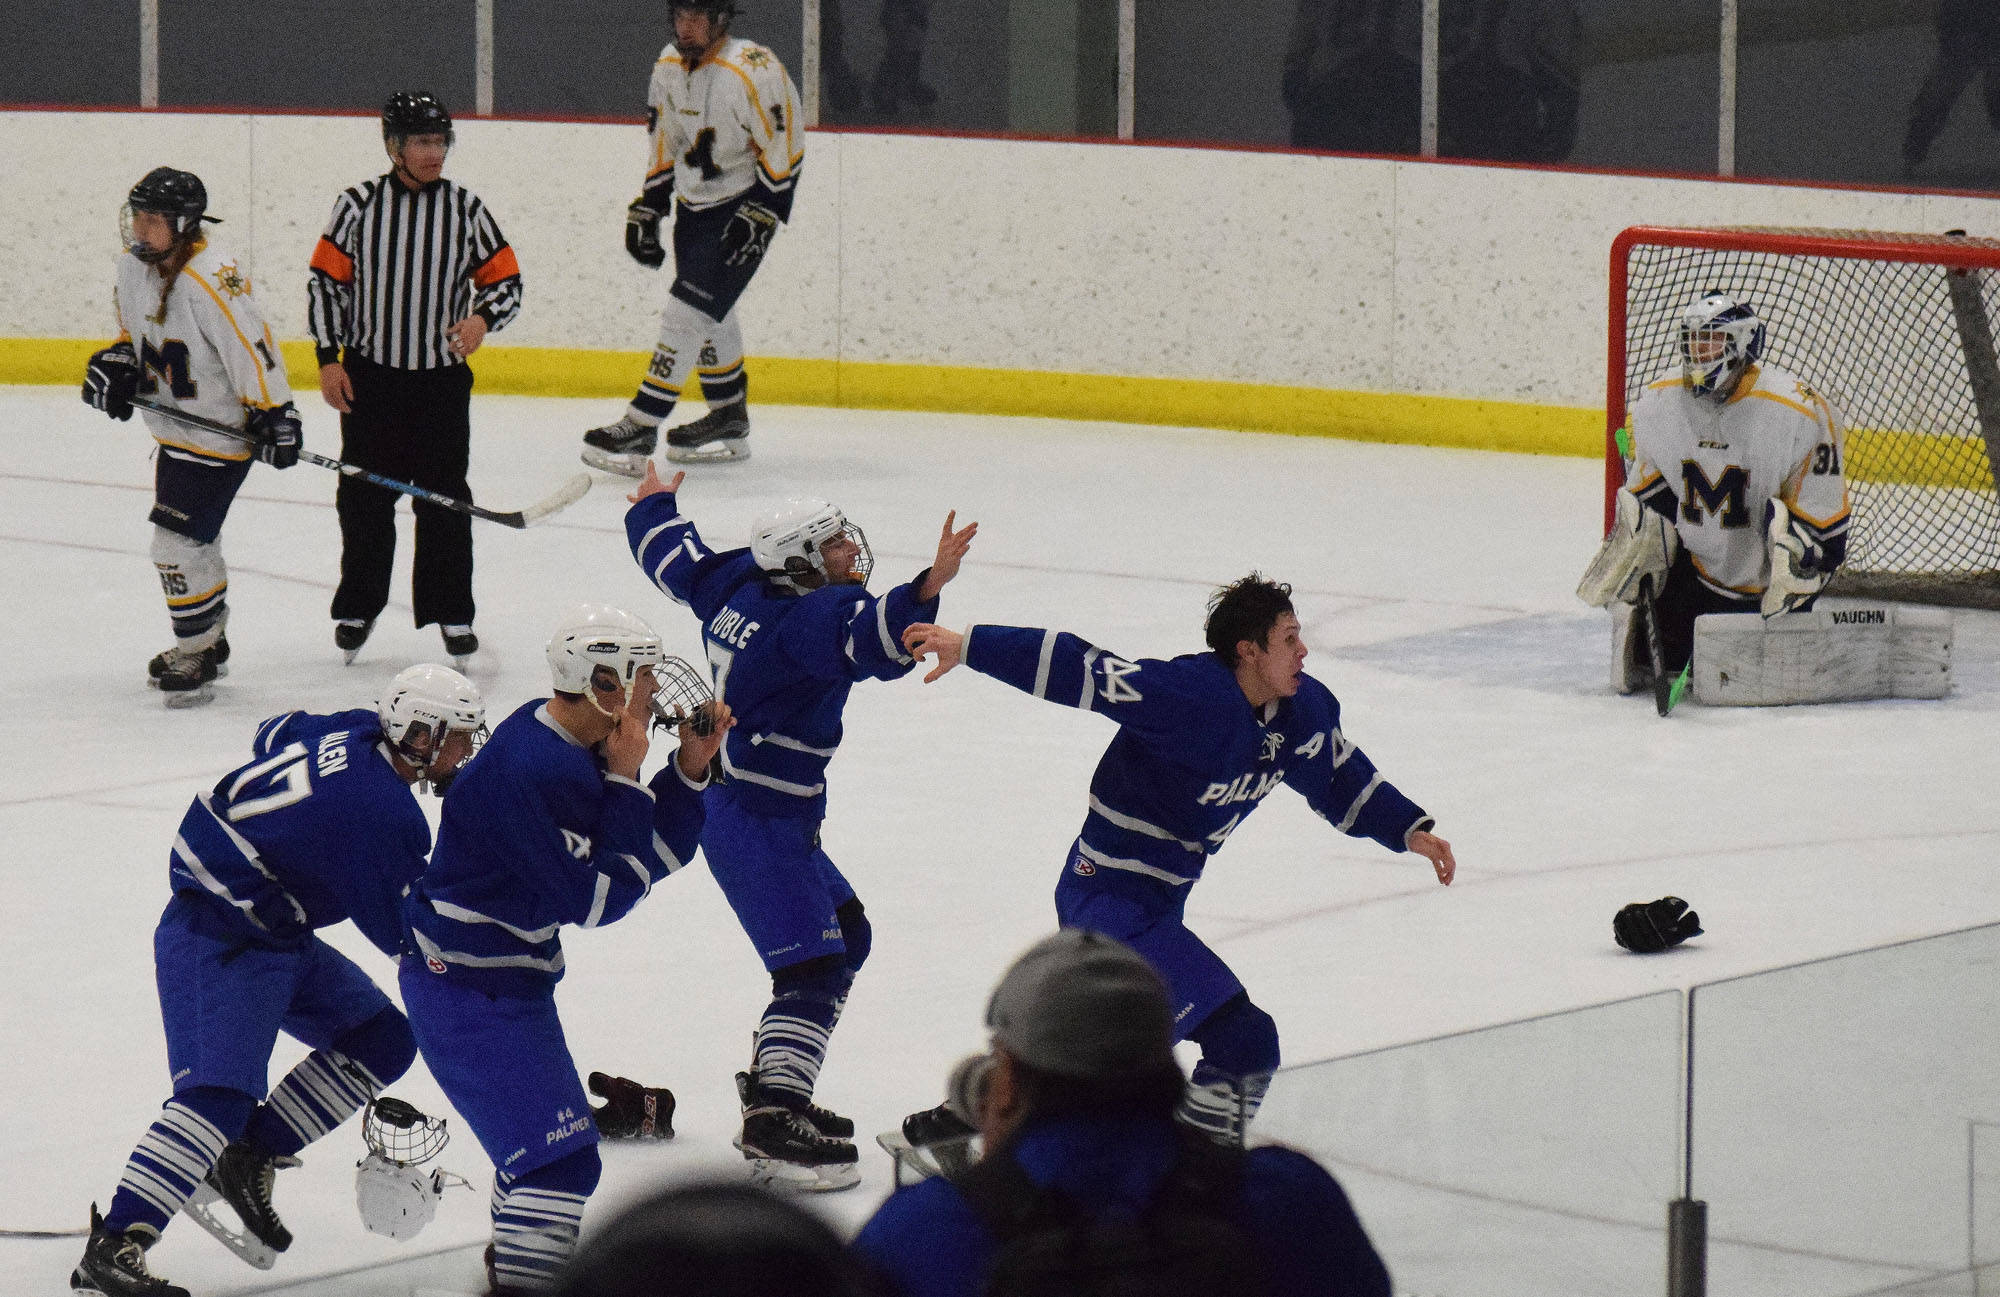 Members of the Palmer hockey team rush the ice in celebration Saturday night after defeating Homer 6-5 in overtime at the Curtis Menard Sports Complex in Wasilla. (Photo by Joey Klecka/Peninsula Clarion)